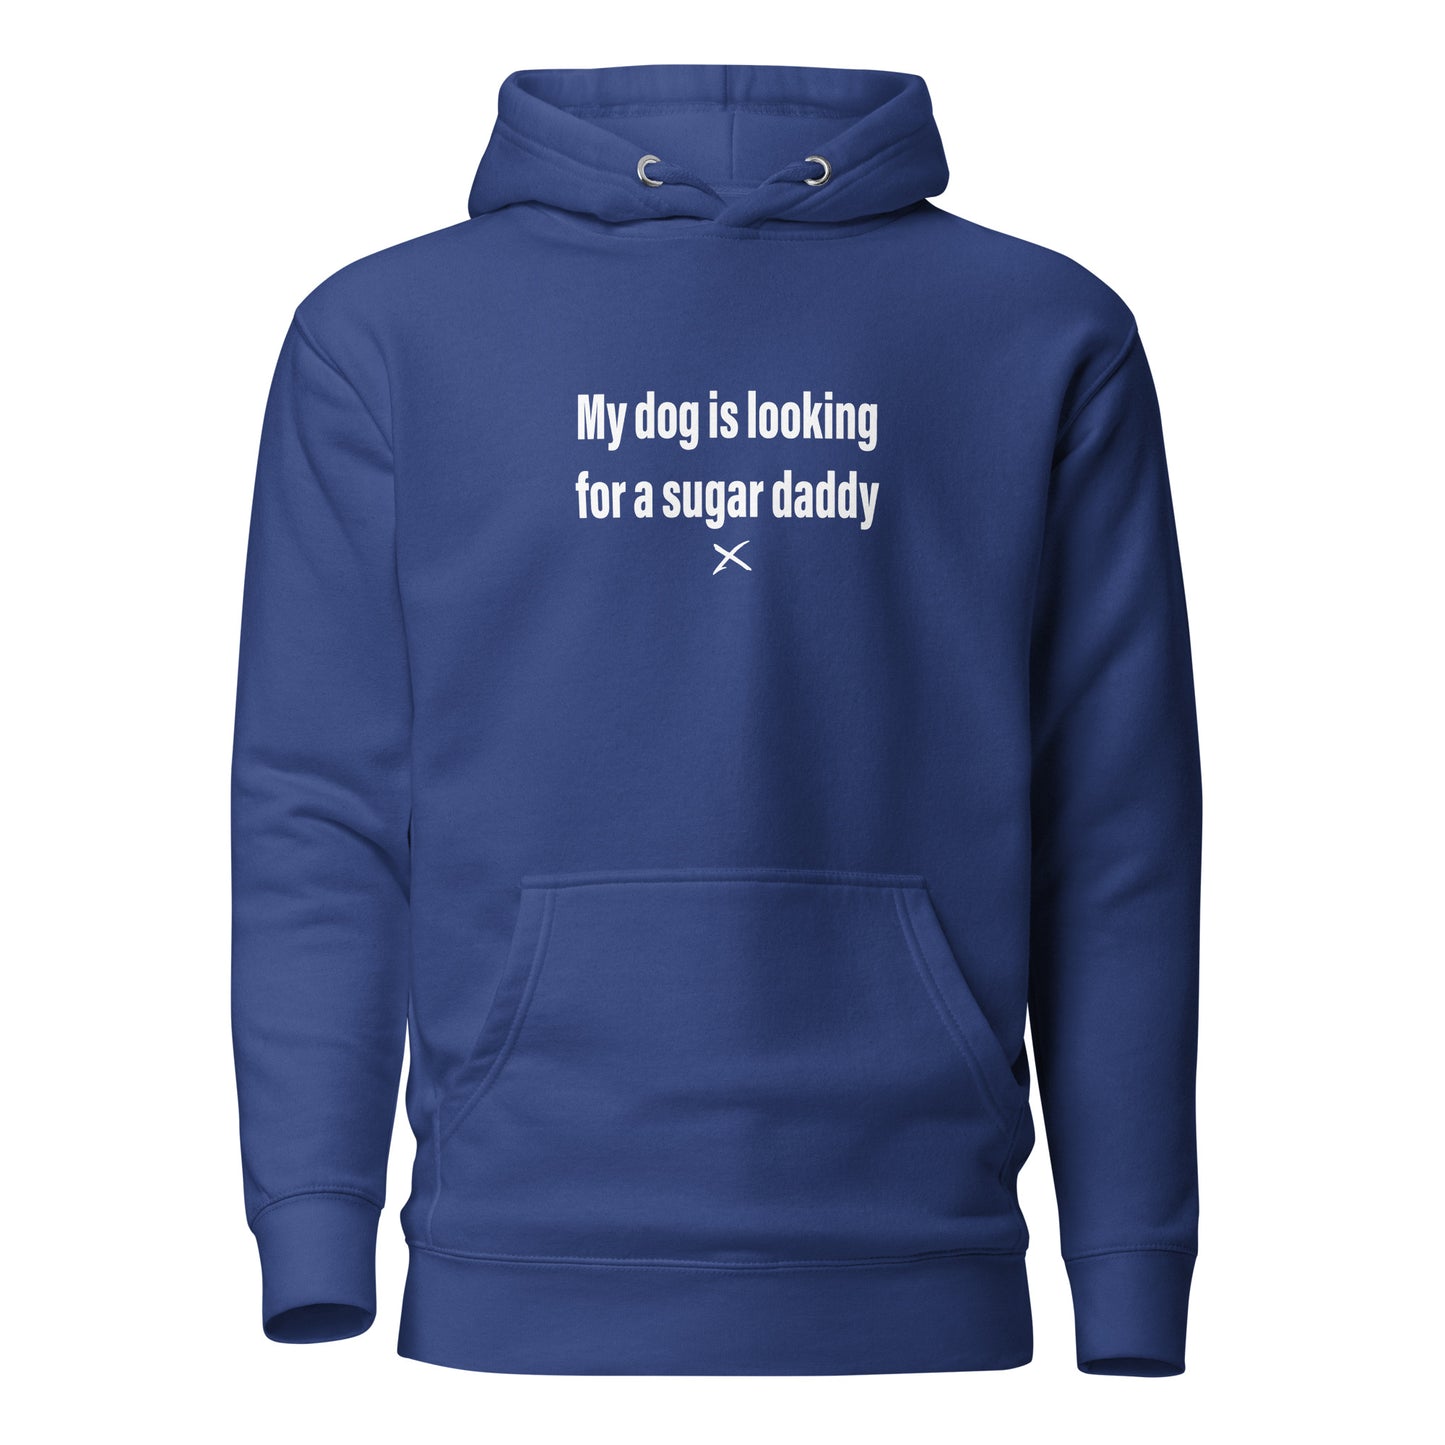 My dog is looking for a sugar daddy - Hoodie